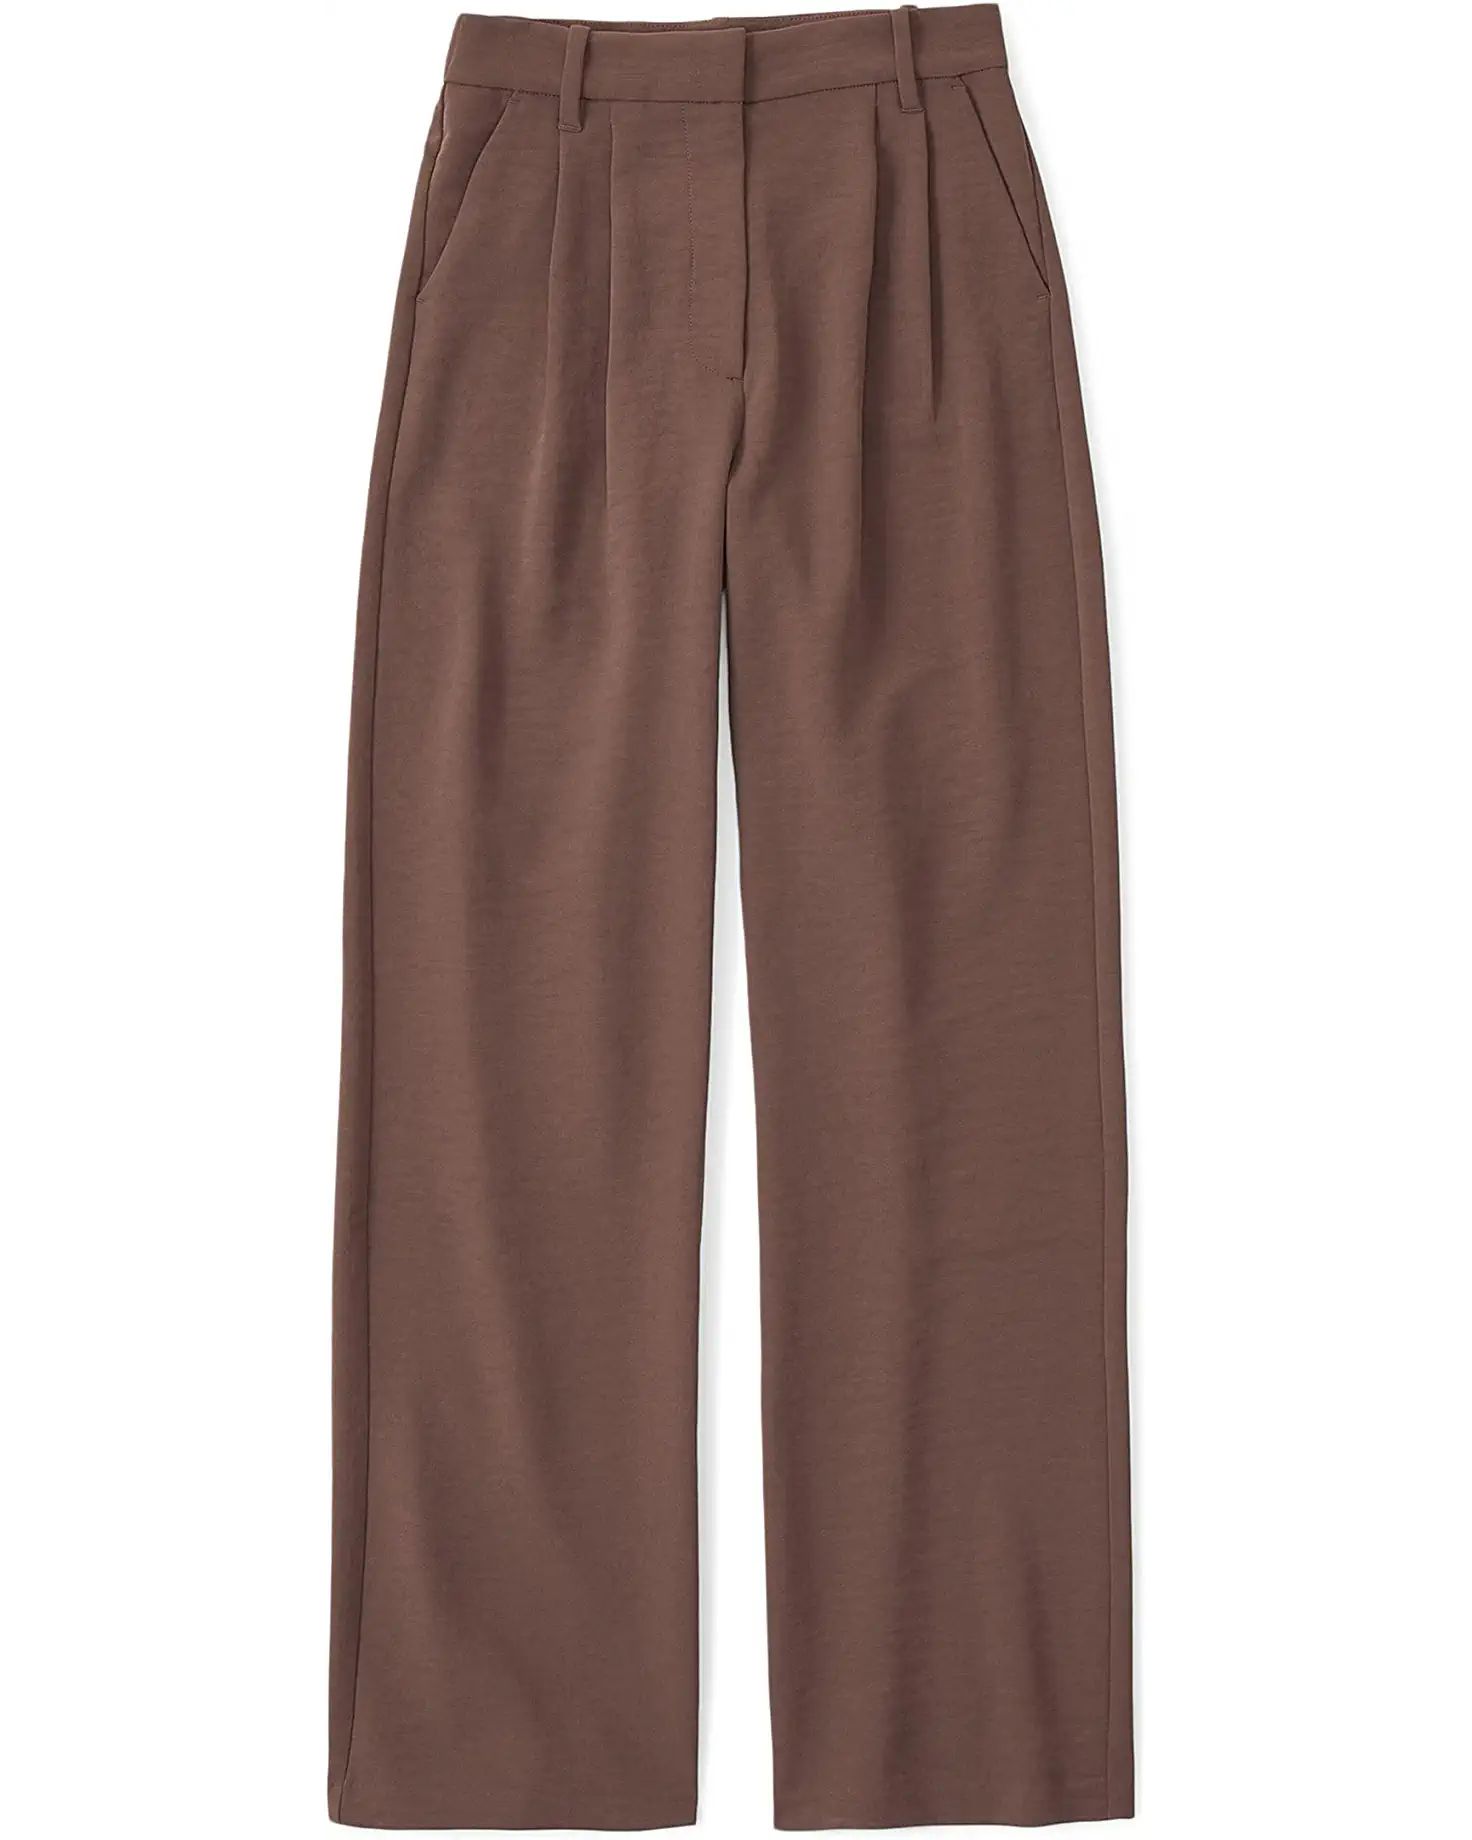 Crepe Tailored Wide Leg Pant | Zappos